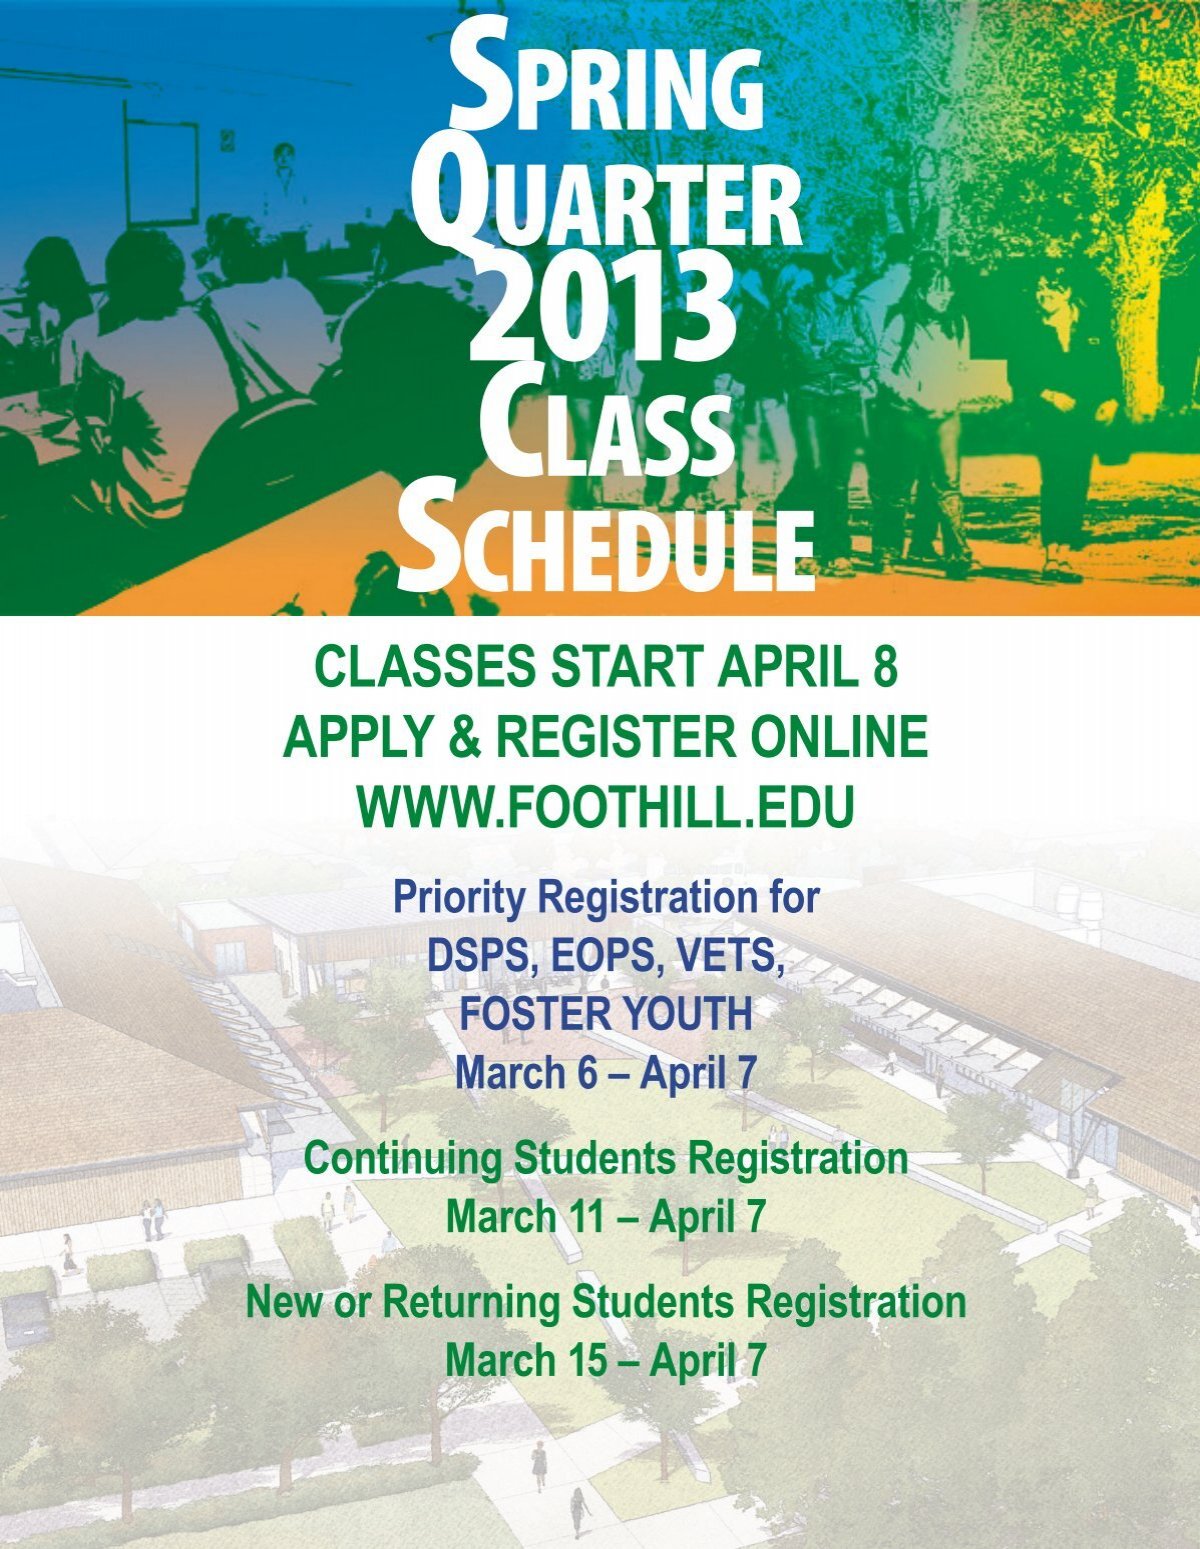 SPRING QUARTER CLASS SCHEDULE - Foothill College